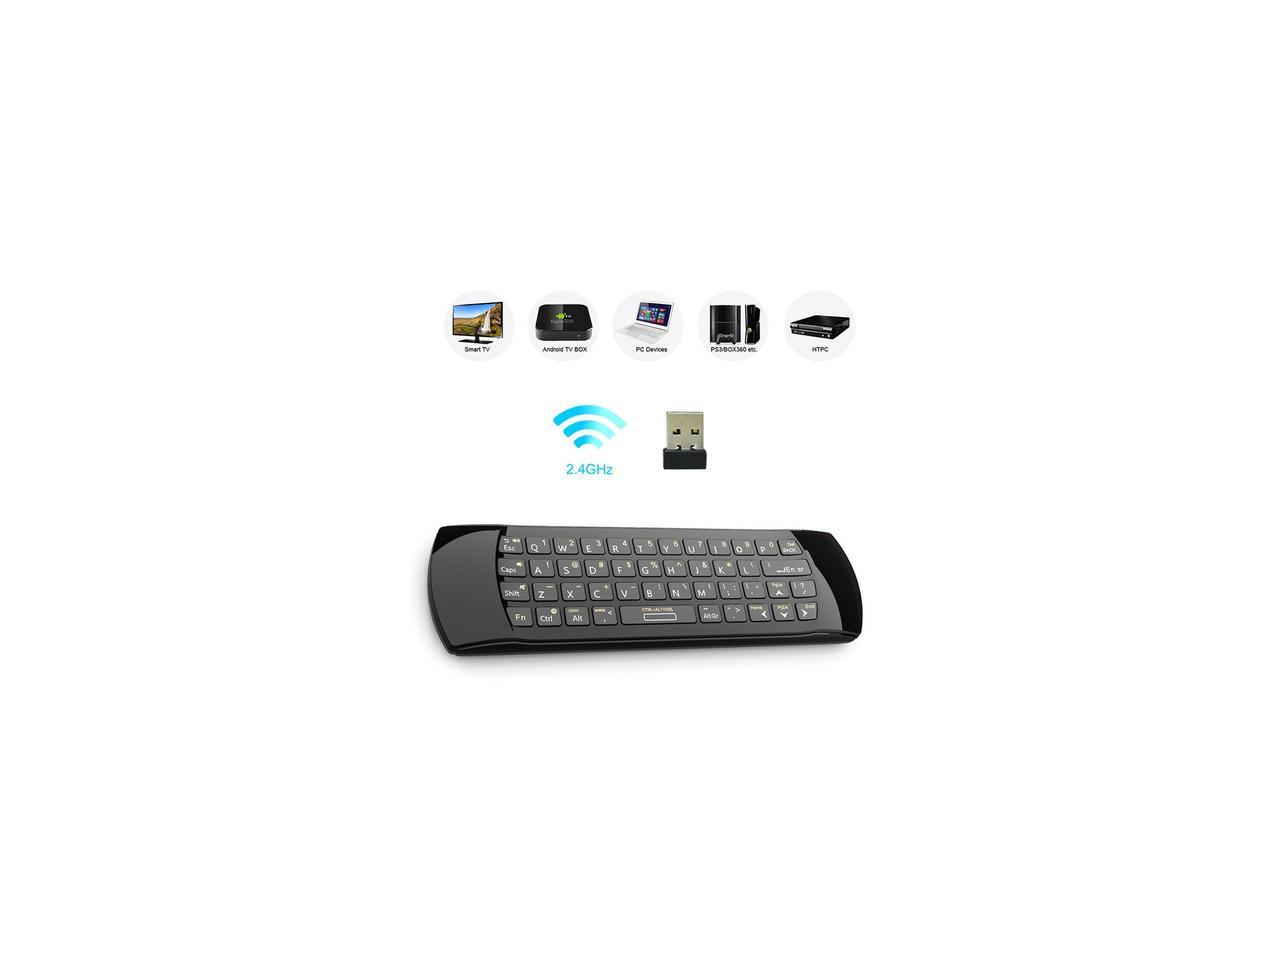 A3 2.4G Wireless Fly Air Mouse Remote Control for PC Smart TV Box Andriod Dongle 